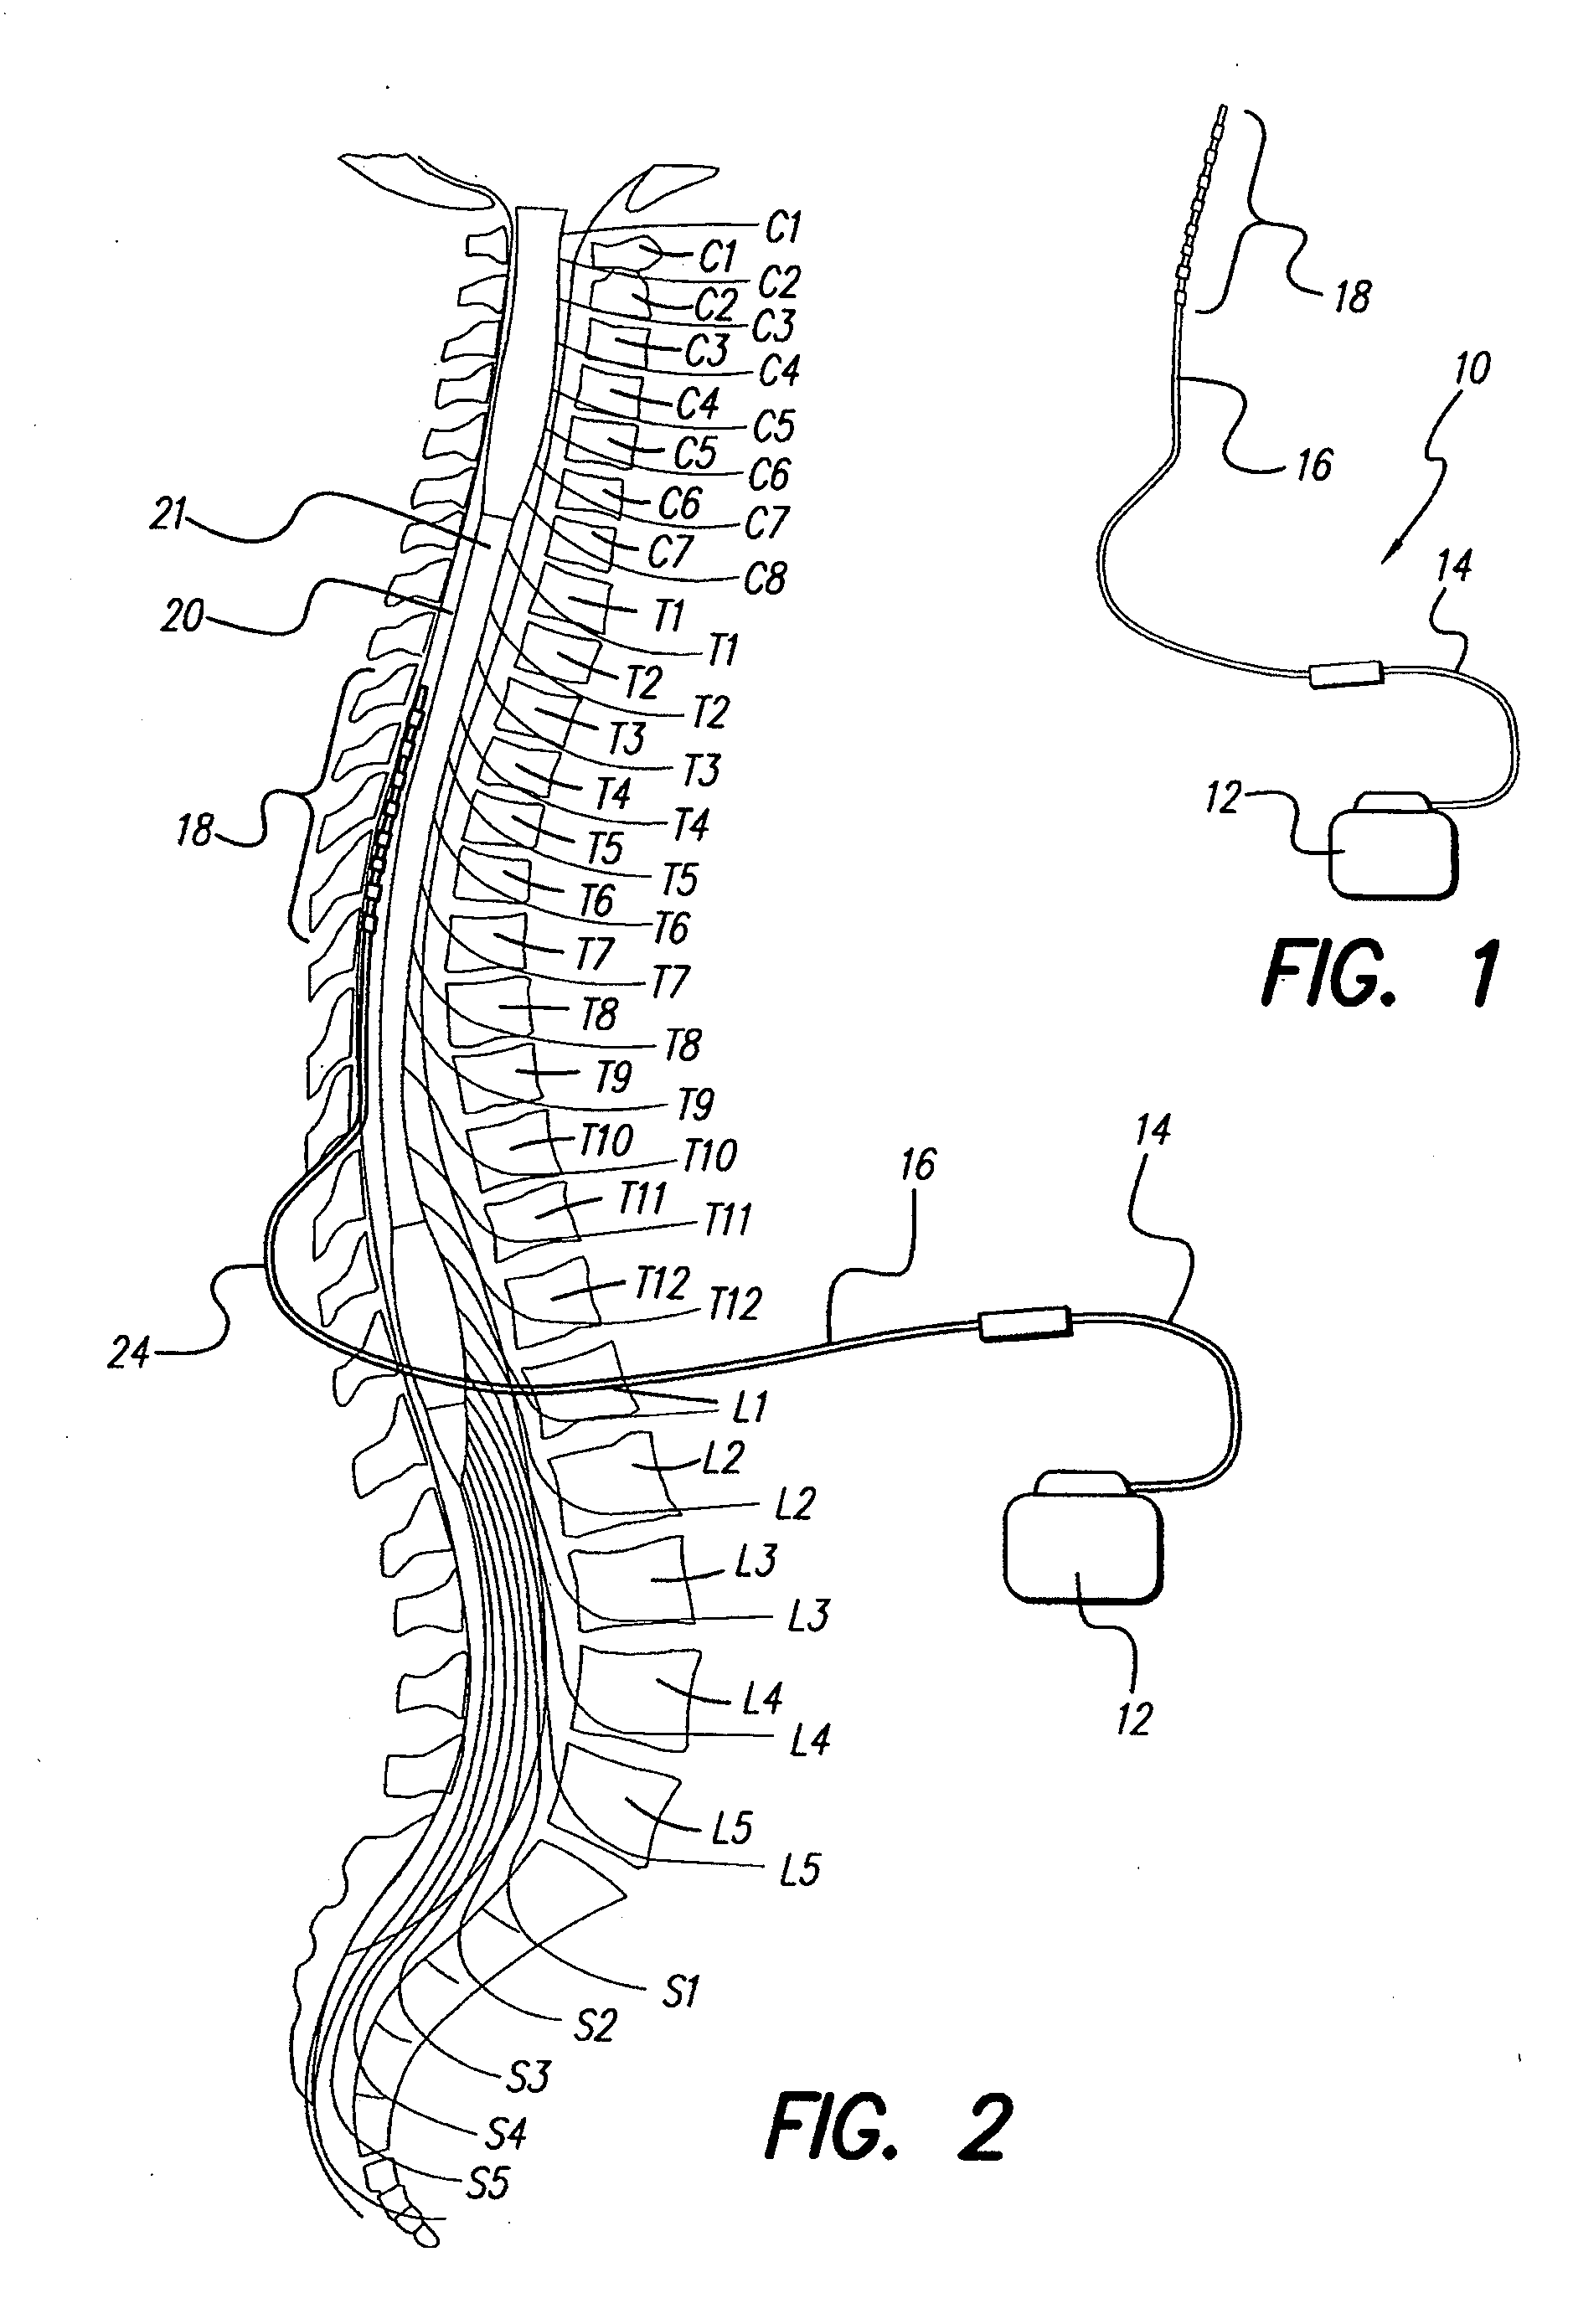 Method for optimizing search for spinal cord stimulation parameter settings